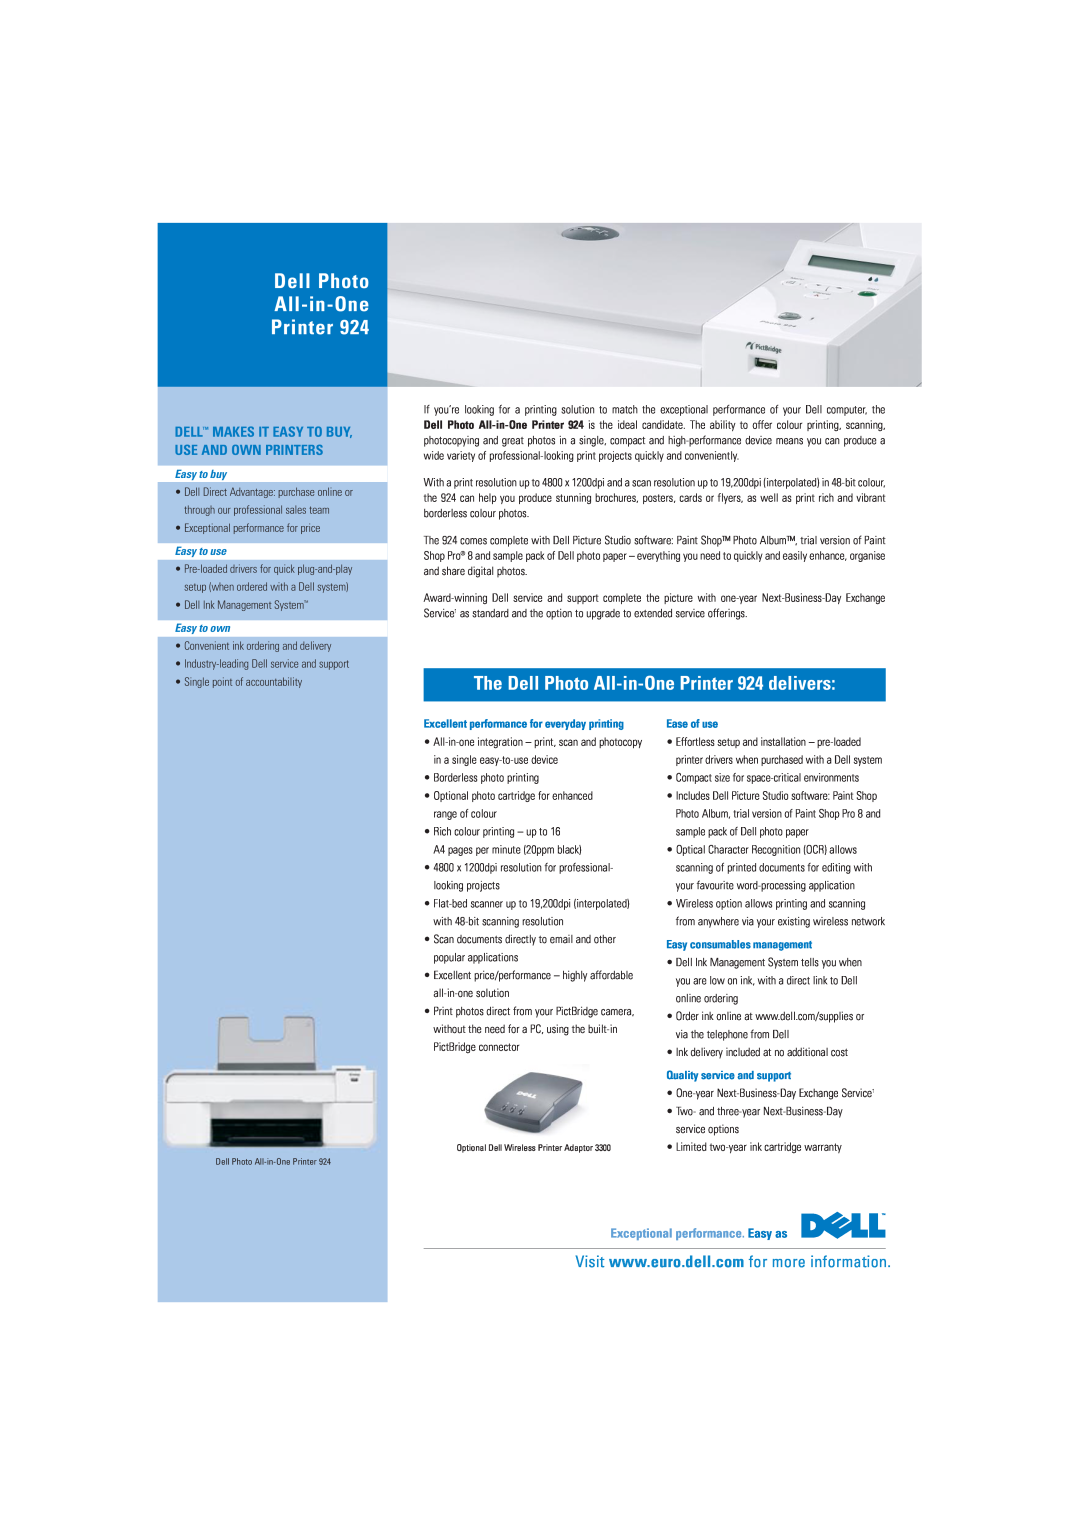 Dell 924 brochure Dell Photo All-in-One Printer, Exceptional performance. Easy as, Easy to buy, Easy to use, Easy to own 